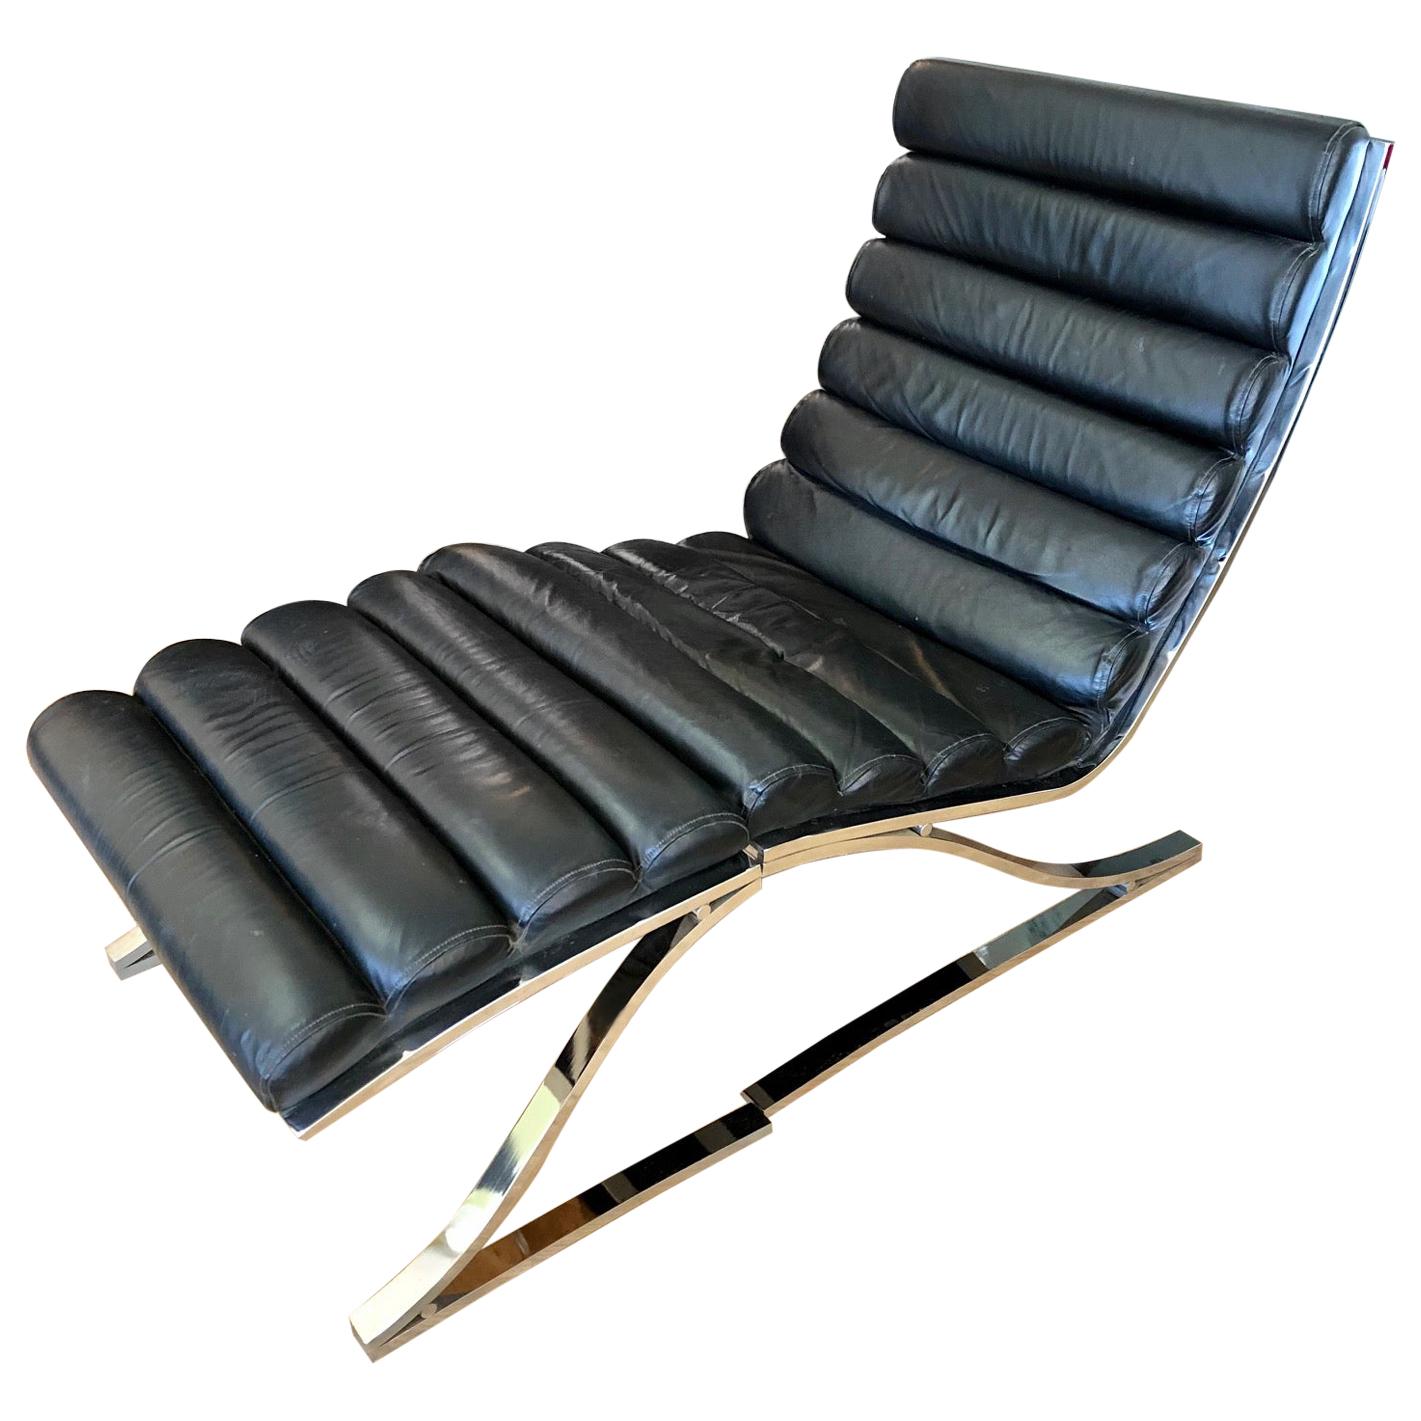 Vintage 1970s Black Leather Channel Back Lounge Chaise with Ottoman by D. I. A.